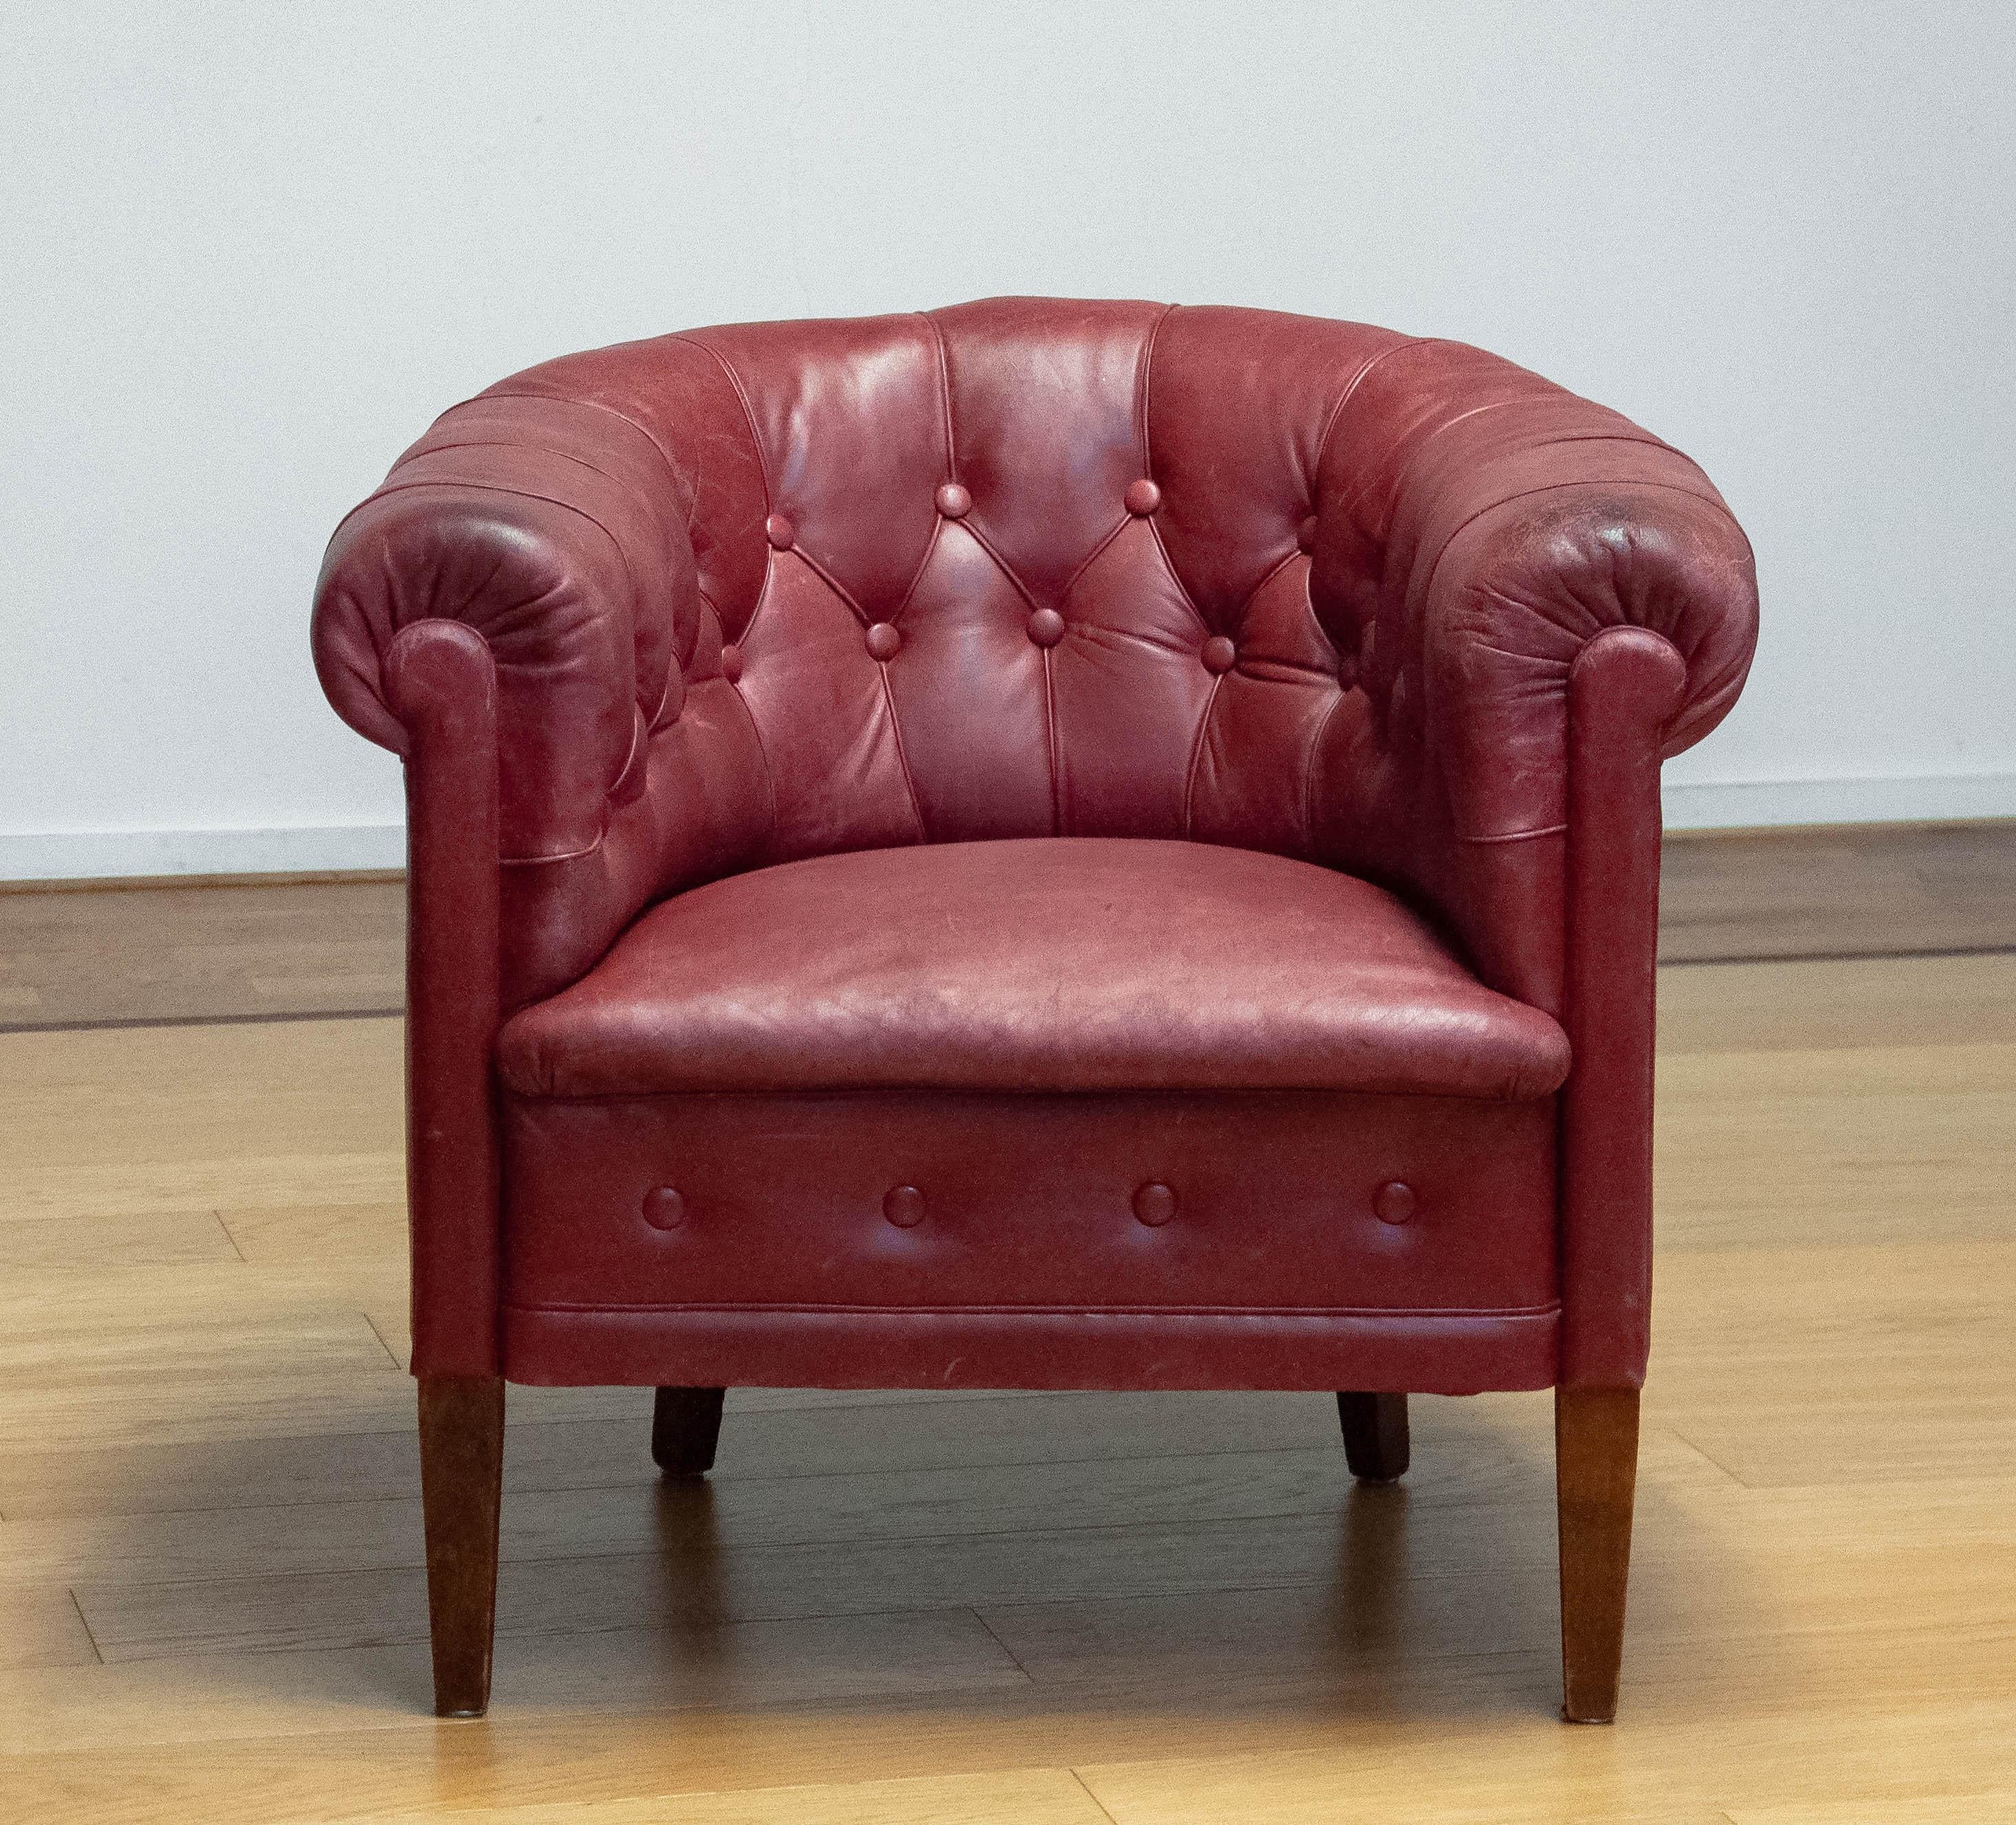 1930s Swedish Crimson Red Chesterfield Club / Lounge Chair in Patinated Leather For Sale 5